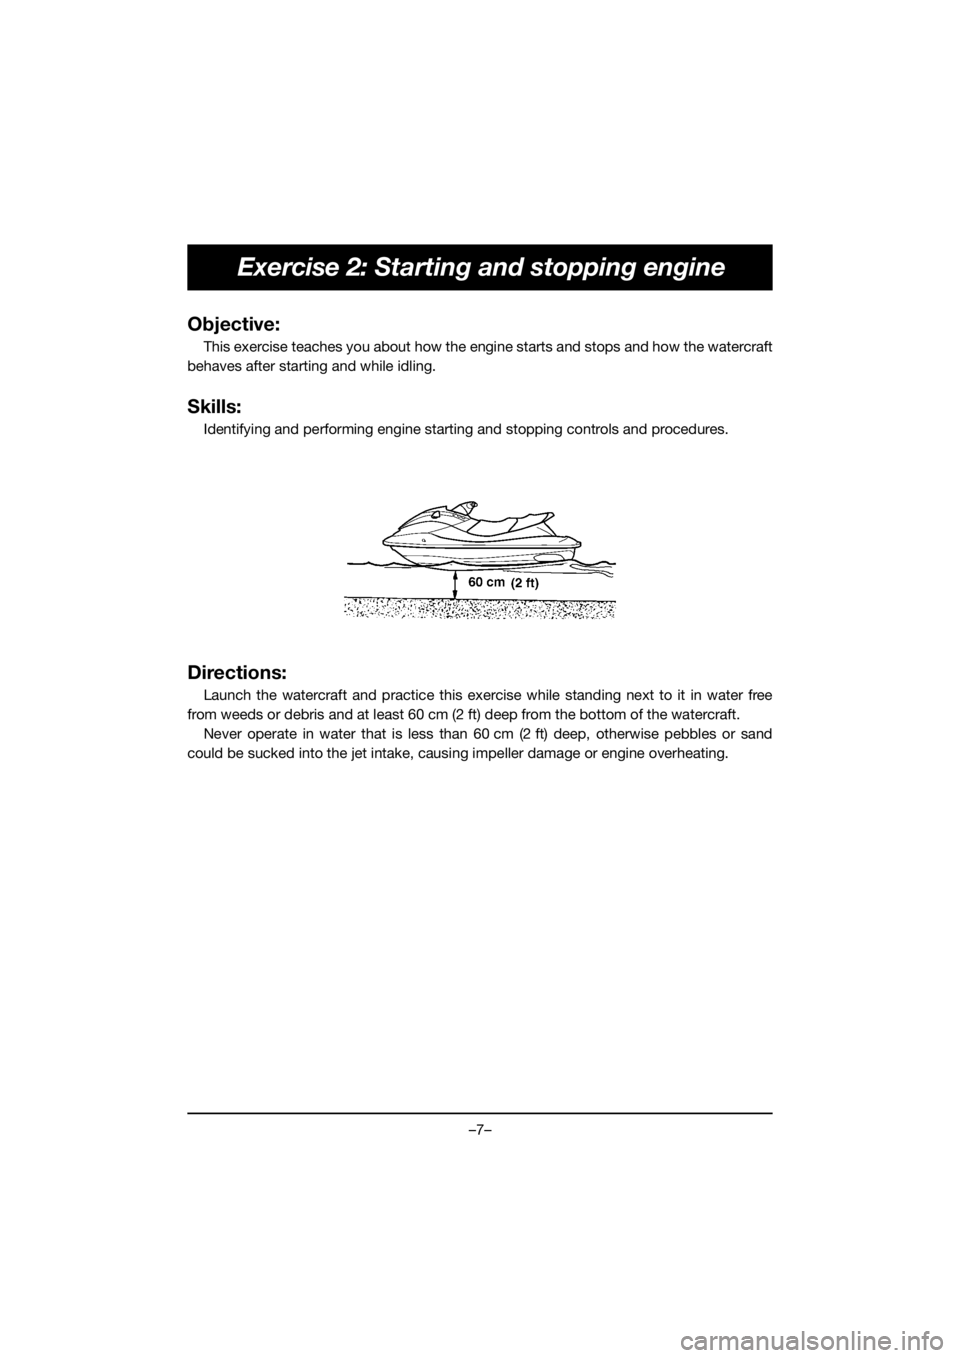 YAMAHA VX DELUXE 2020  Bruksanvisningar (in Swedish) –7–
Exercise 2: Starting and stopping engine
Objective:
This exercise teaches you about how the engine starts and stops and how the watercraft
behaves after starting and while idling.
Skills:
Iden